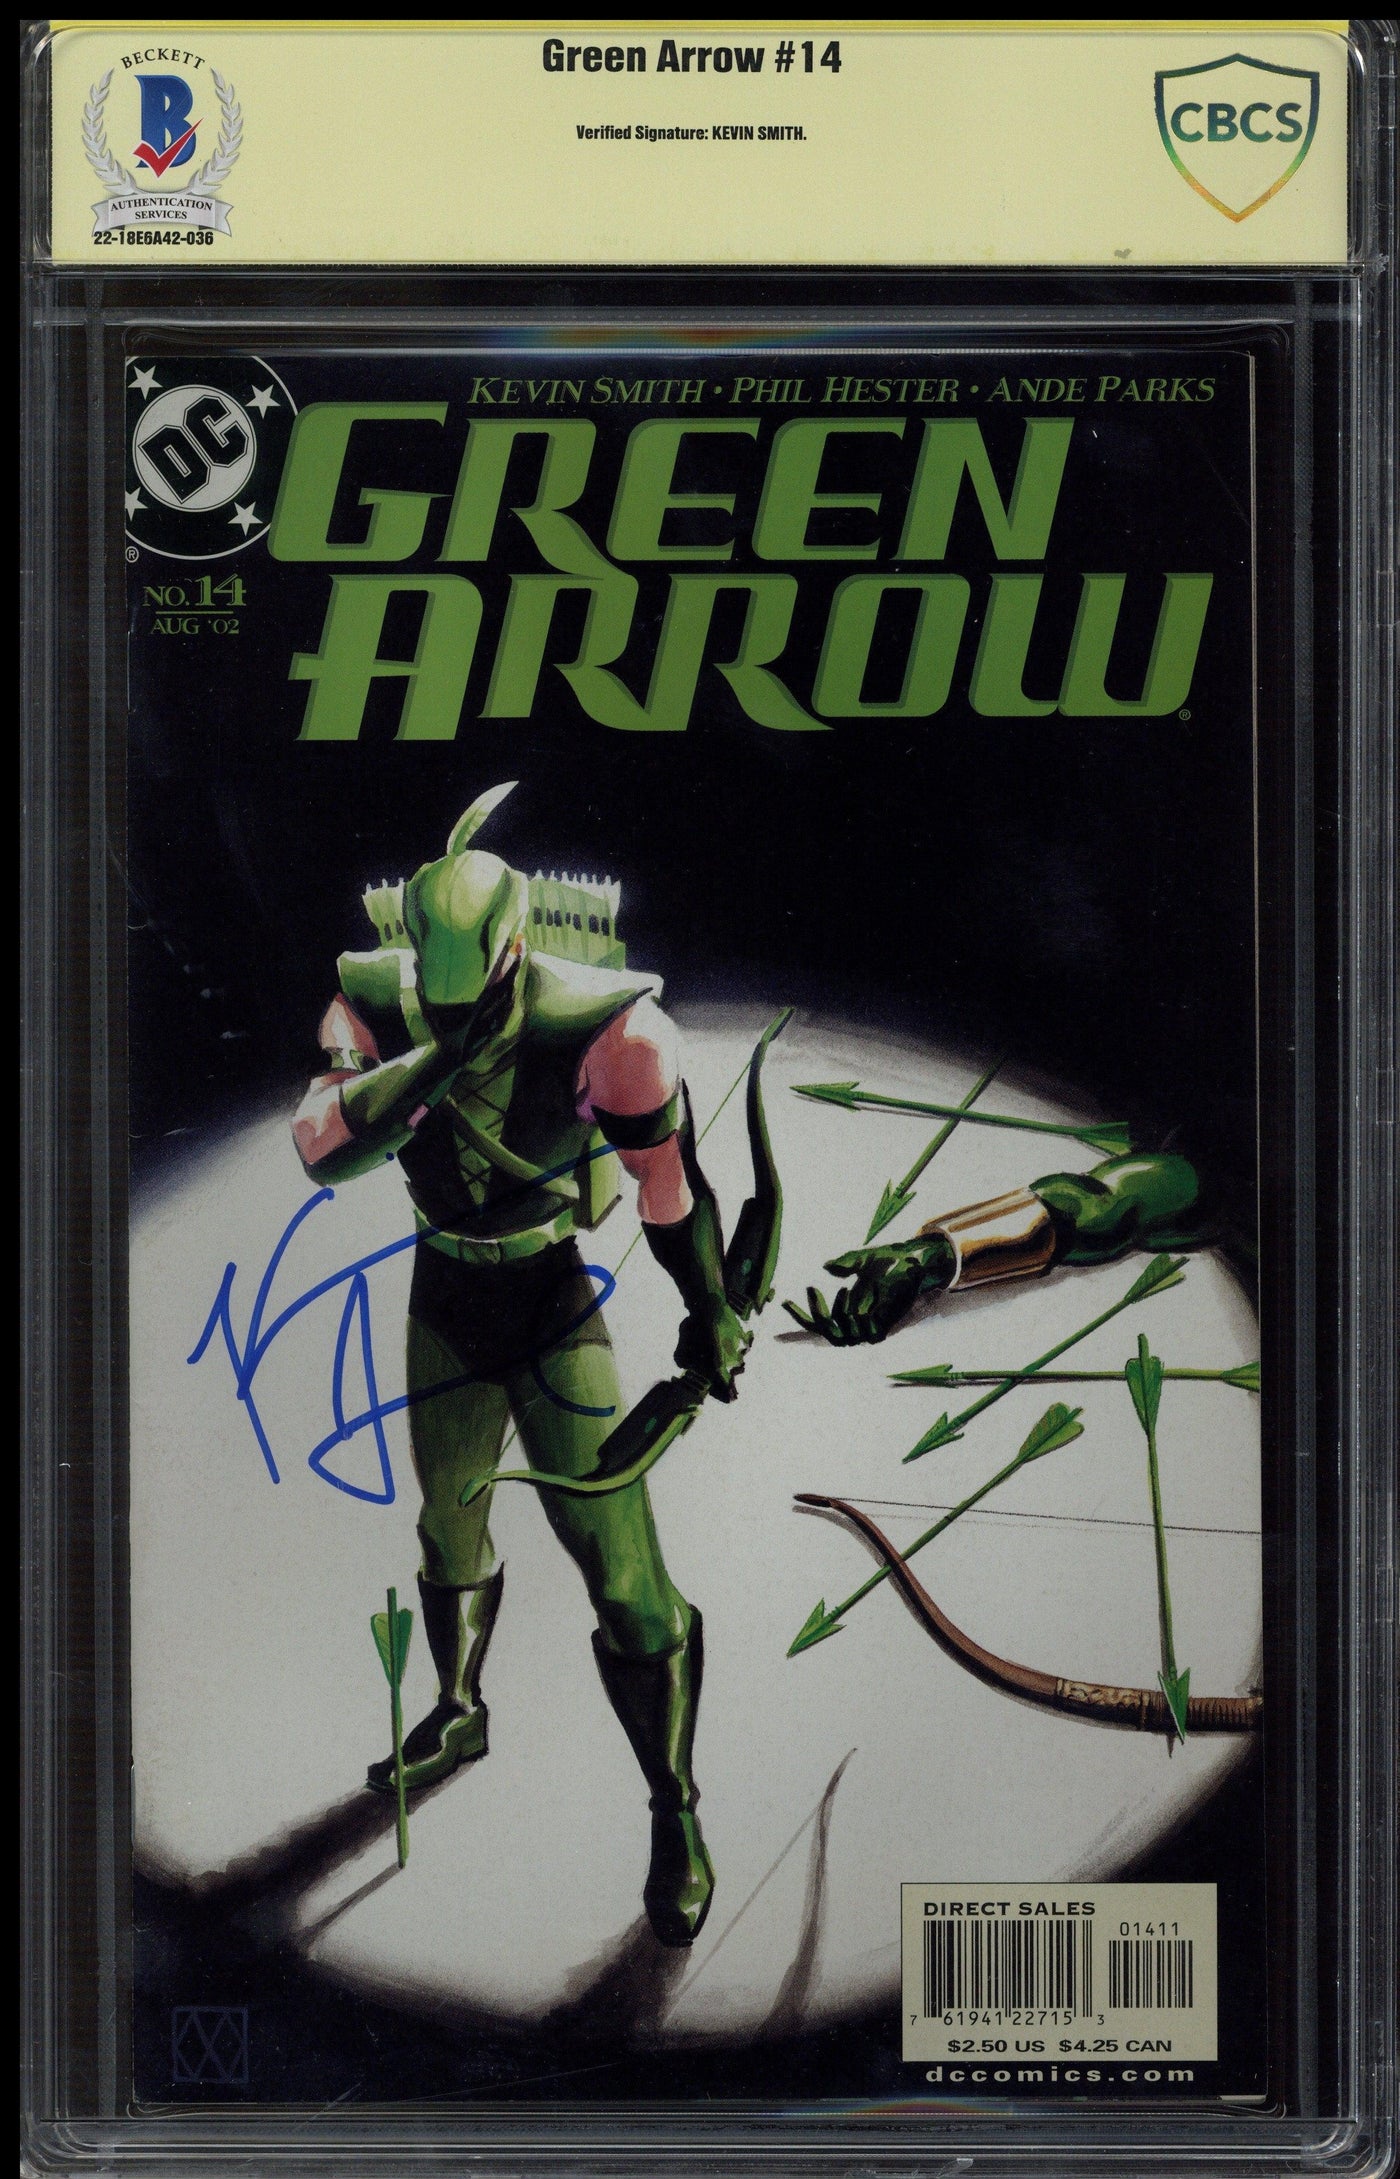 Kevin Smith Signed Green Arrow Comic Book Autographed CBCS Slabbed